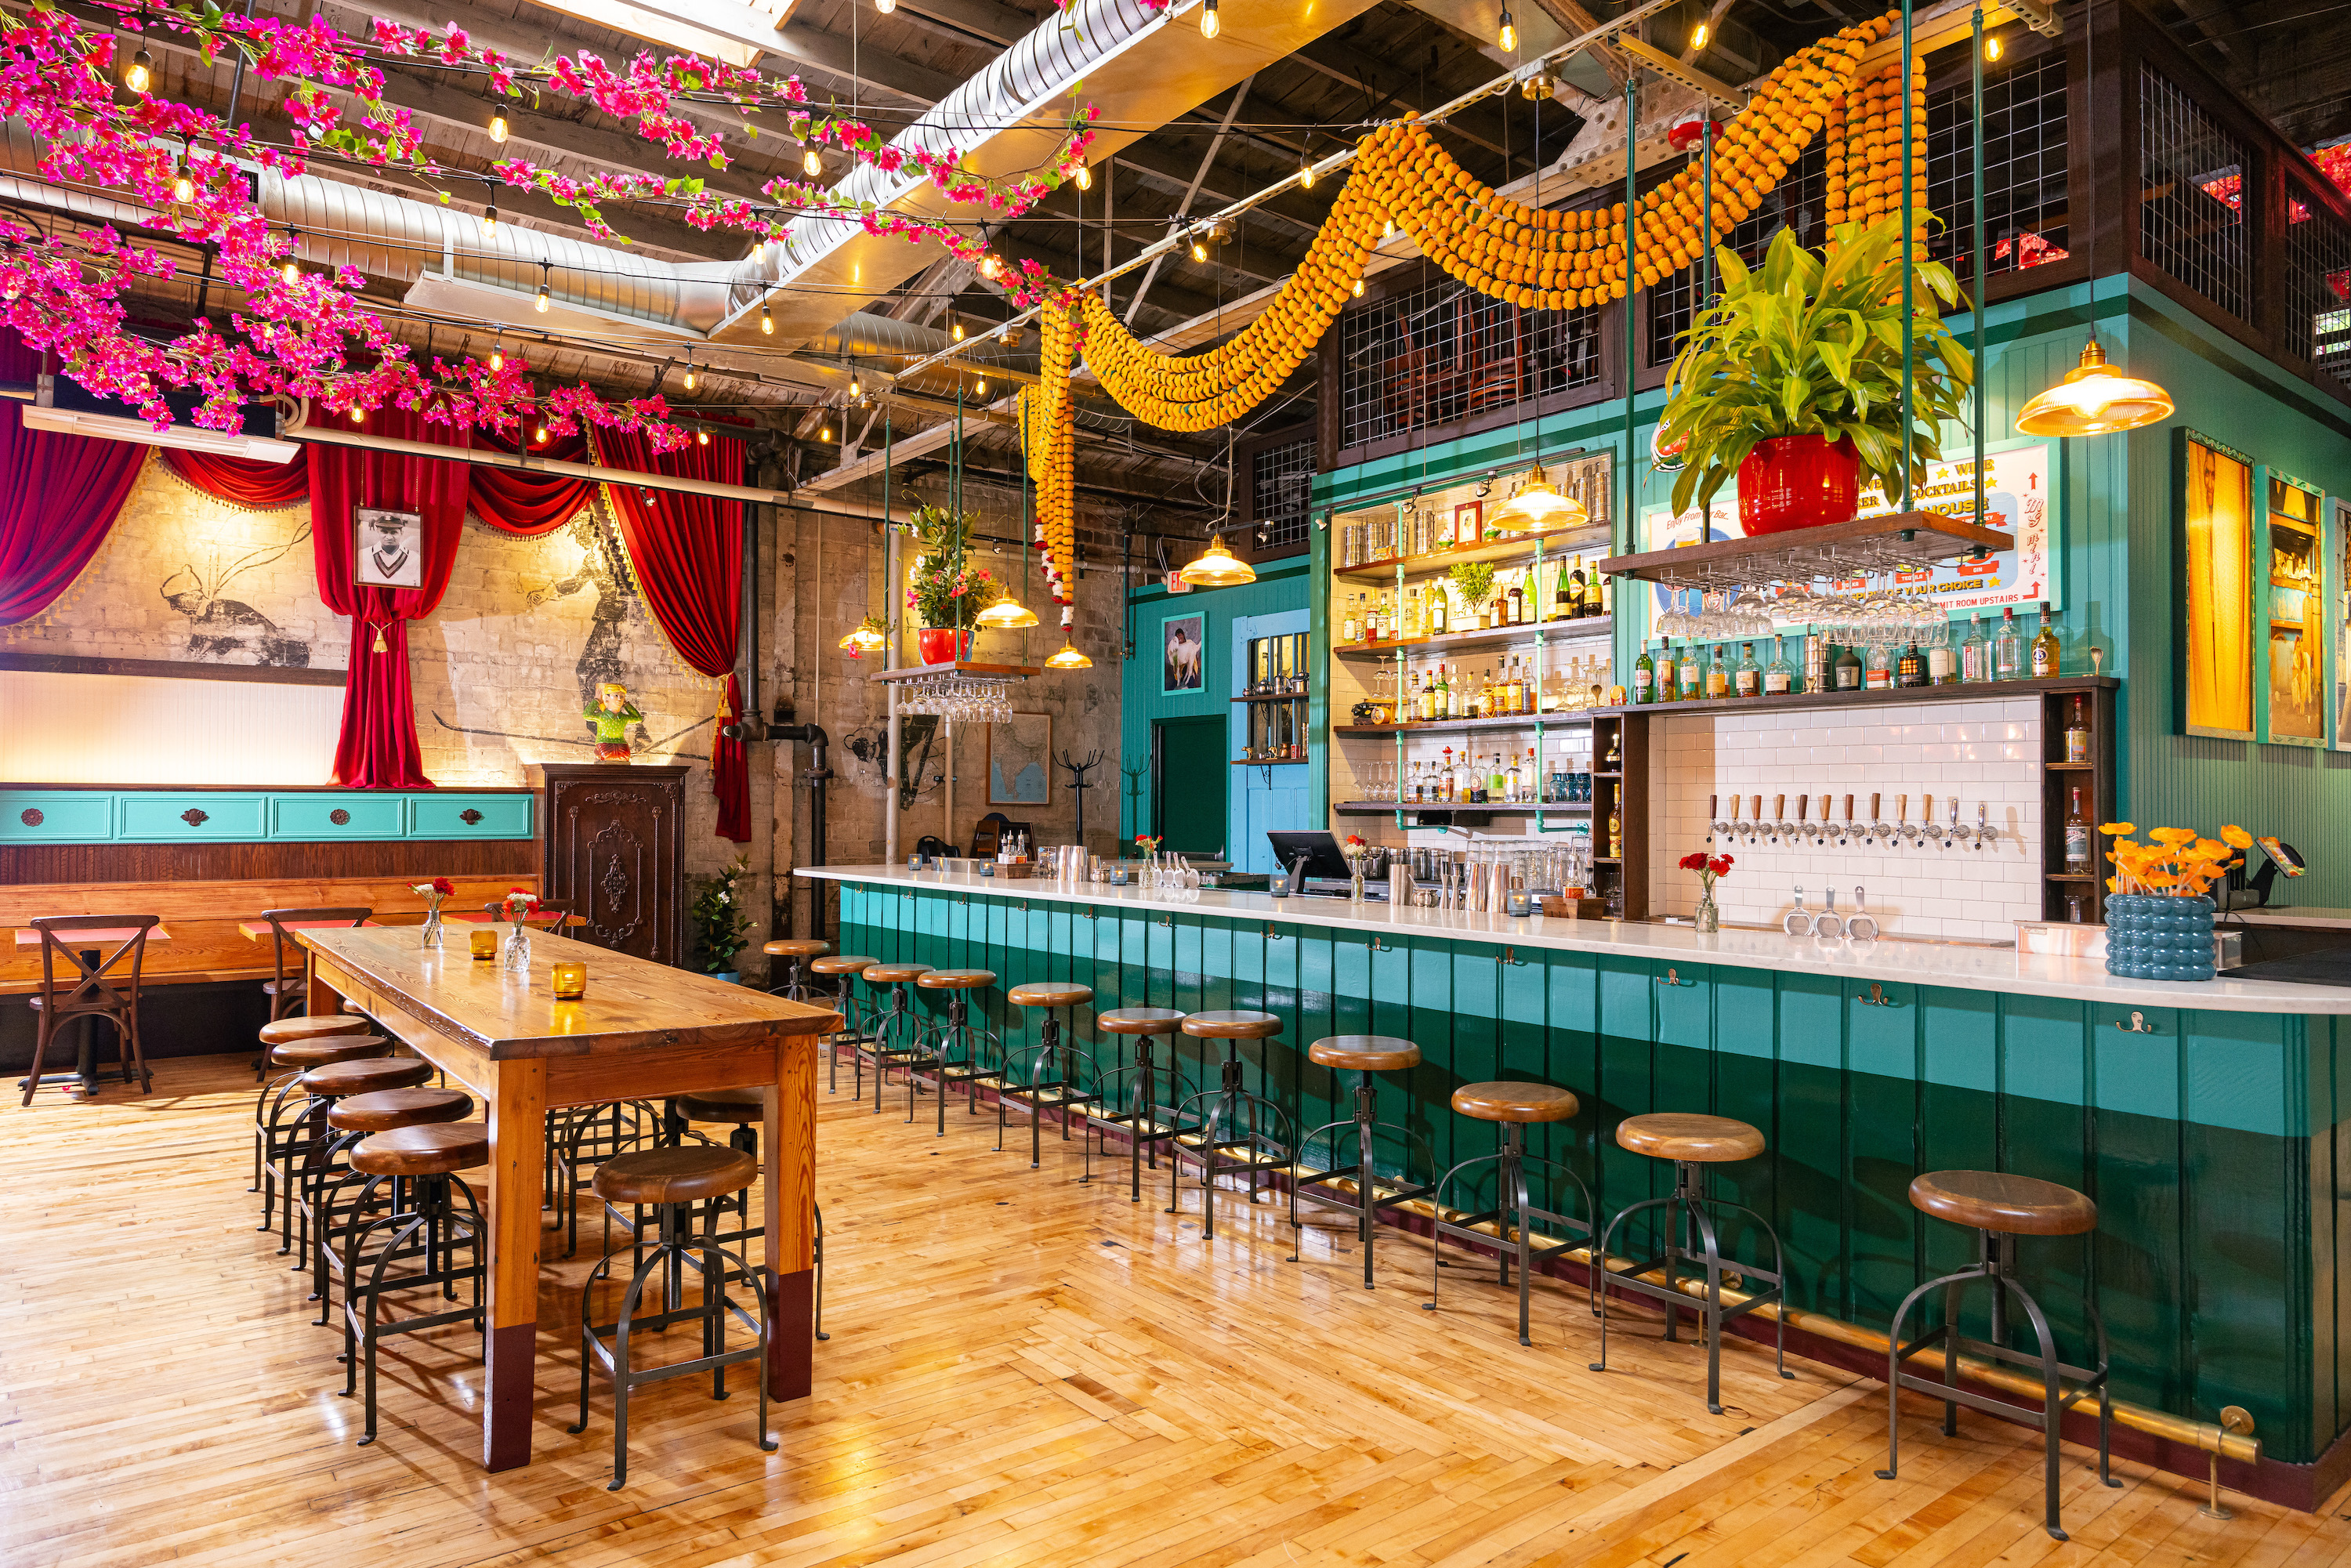 A bright teal bar with pink and yellow flowers hanging from the ceiling